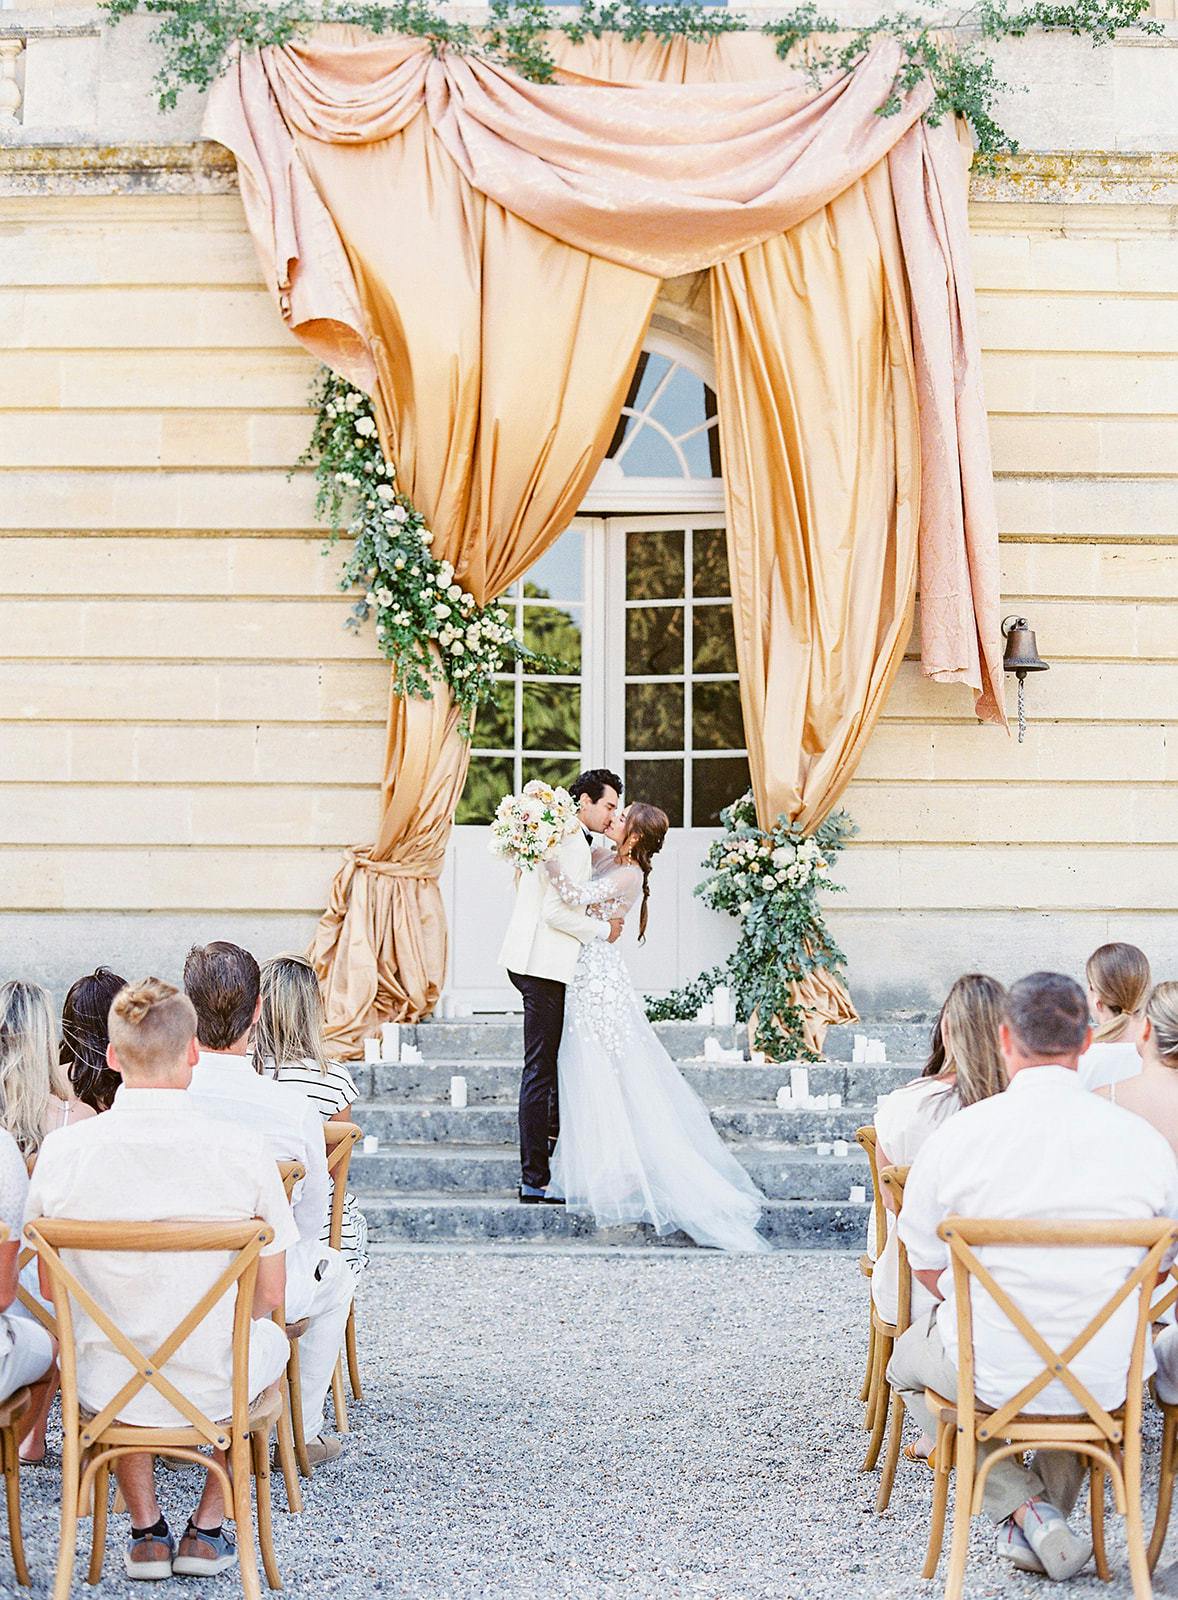 Elegant Outdoor Wedding at Chateau de Courtomer in Courtomer, France | PartySlate